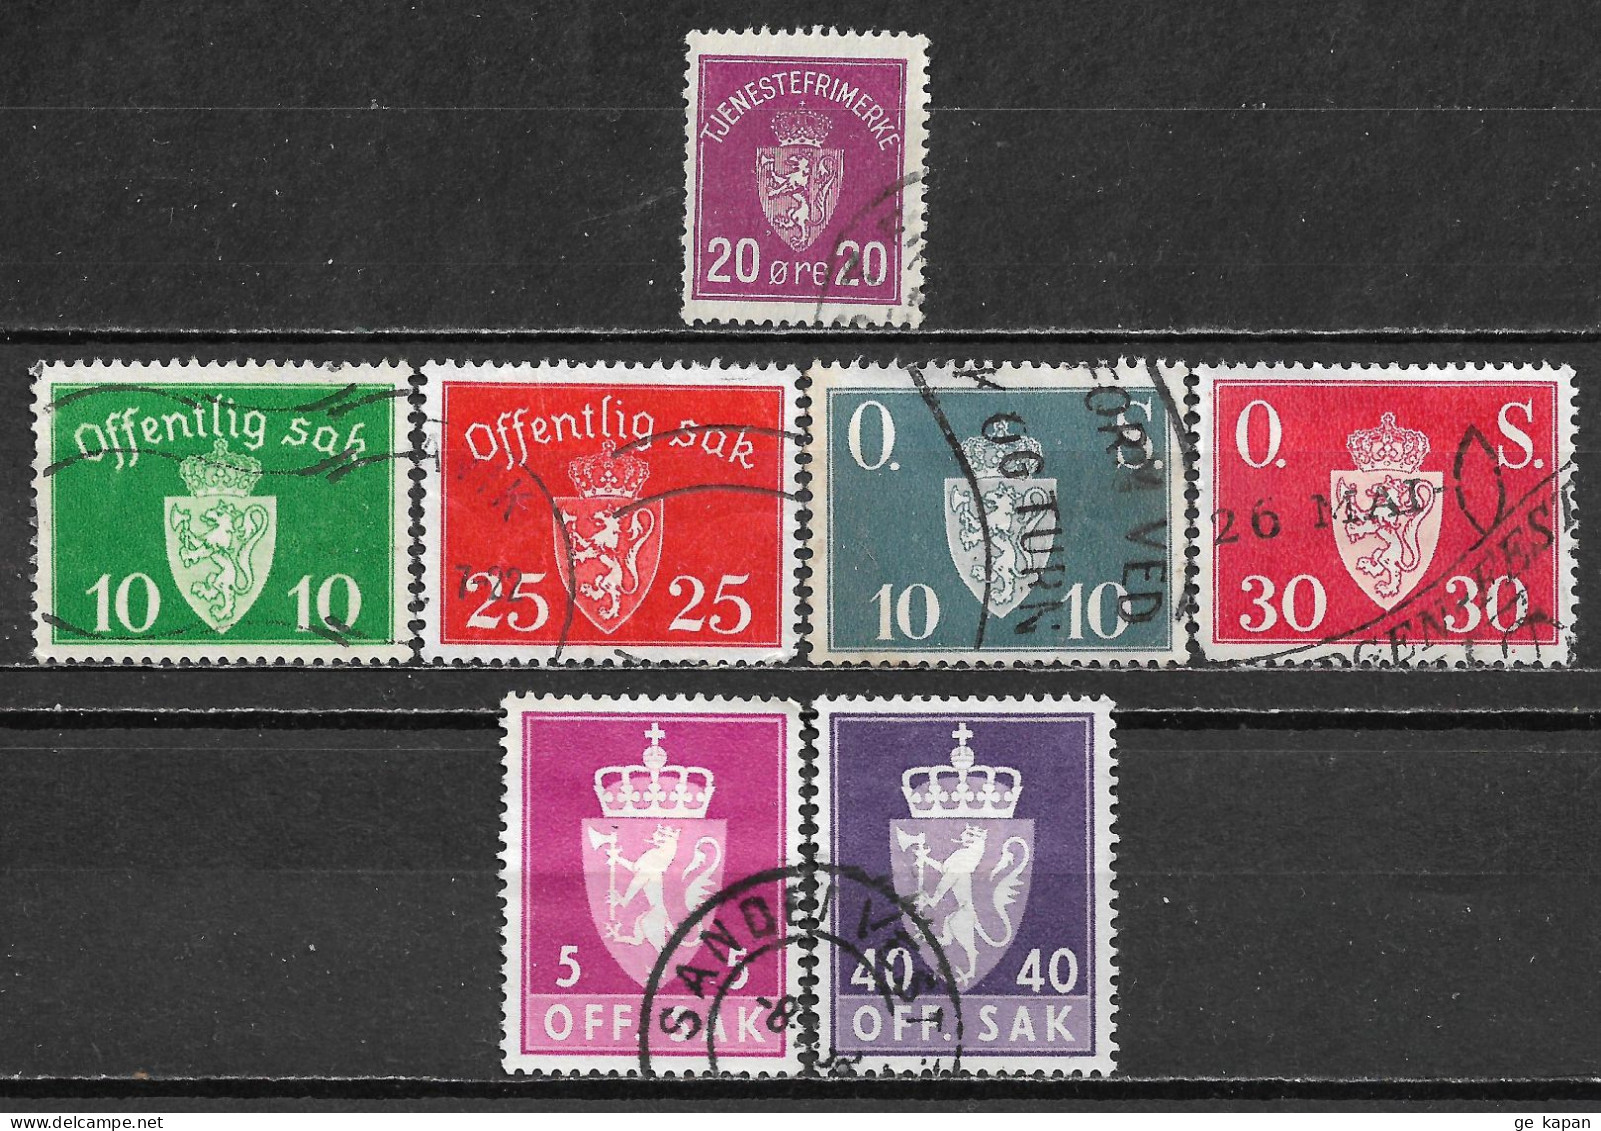 1926-1955 NORWAY SET OF 7 OFFICIAL USED STAMPS (Michel # 4,35,55,62,64,68x,75x) - Officials